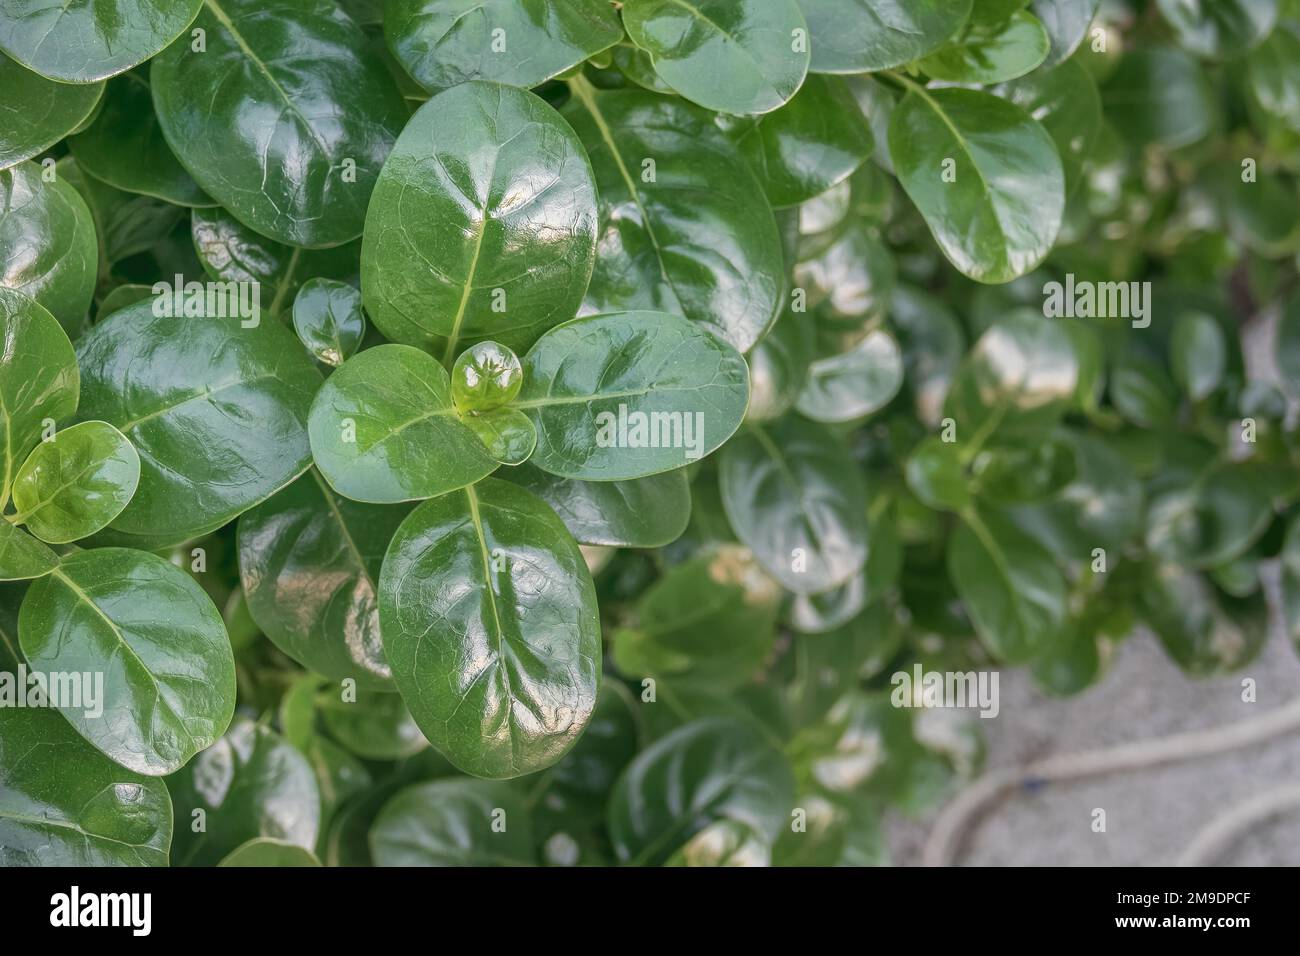 tree bedstraw with shiny leaf growing outdoor in daytime Stock Photo